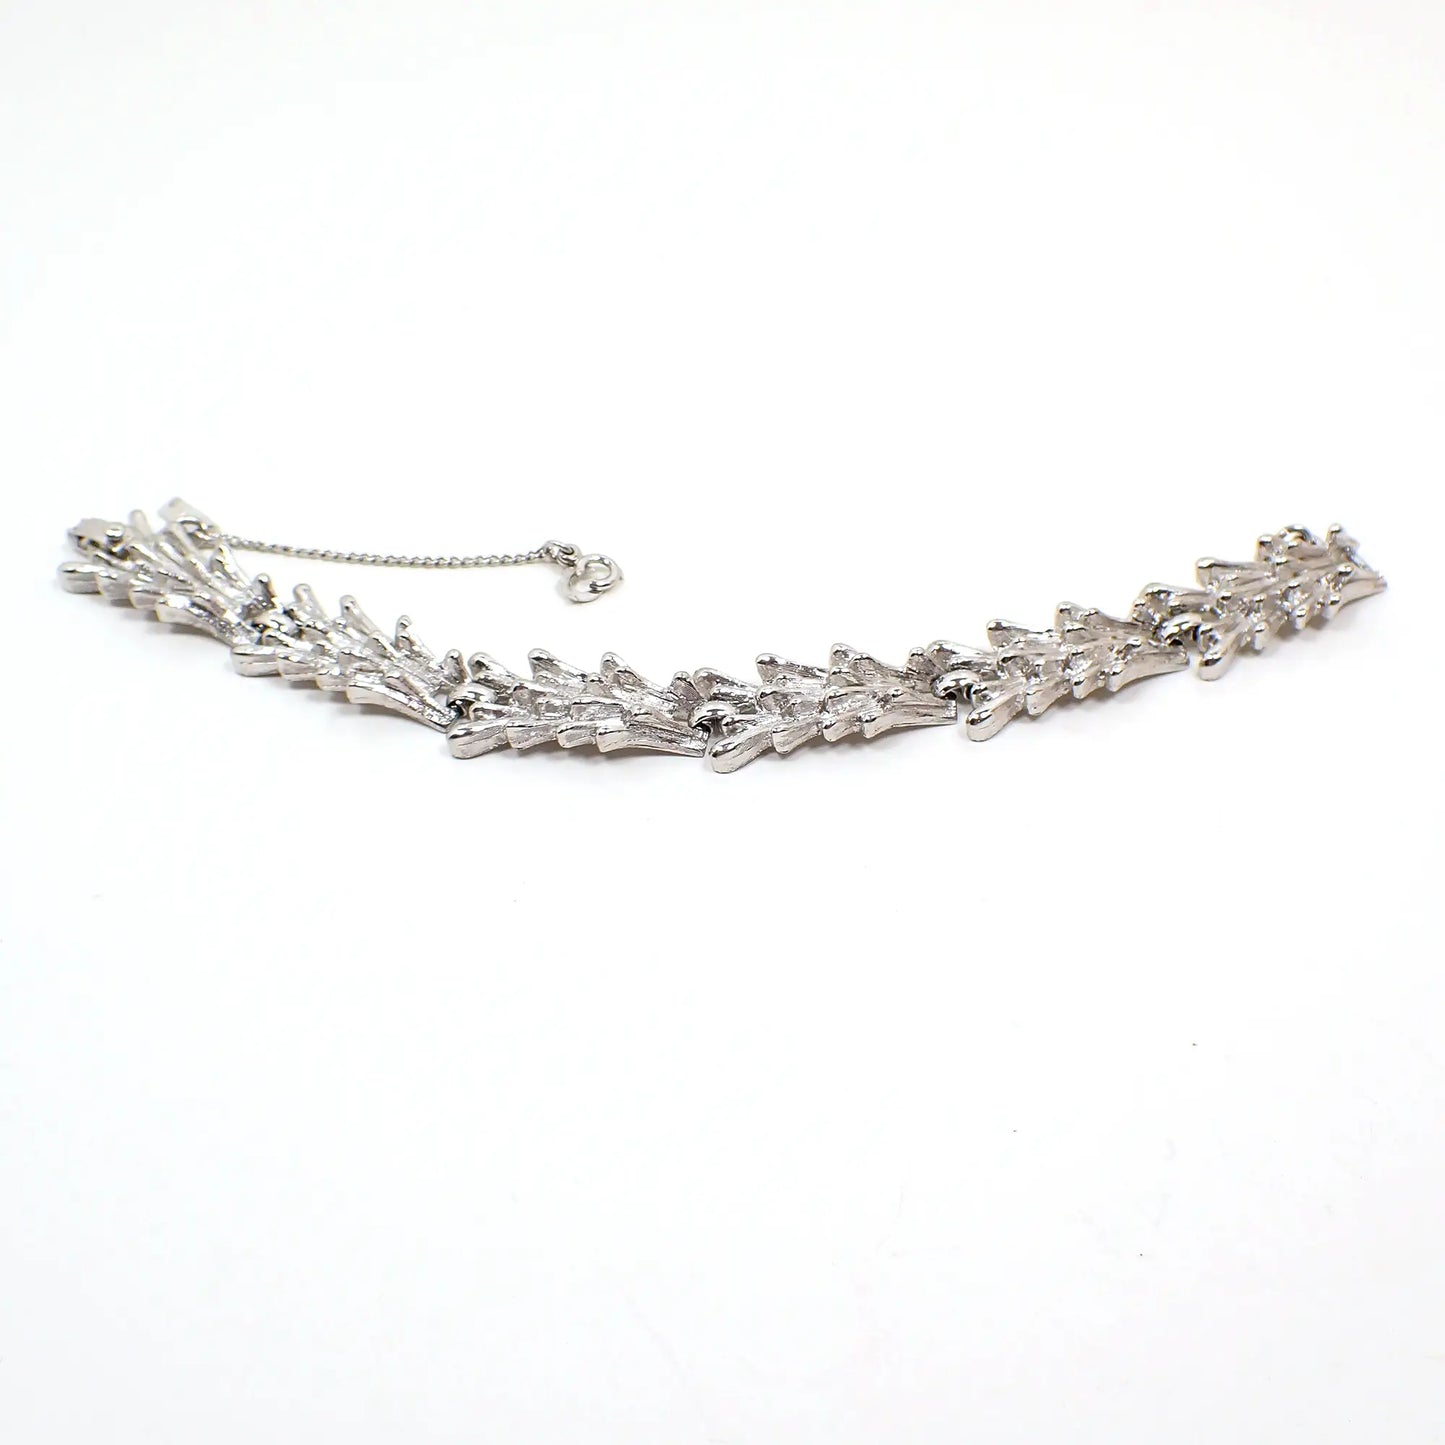 Angled view of the Mid Century vintage Monet link bracelet. The metal is textured matte silver tone in color. The links have a rounded end spiky Brutalist style appearance. There is a snap lock clasp at the end and a safety chain with hinged clasp. 